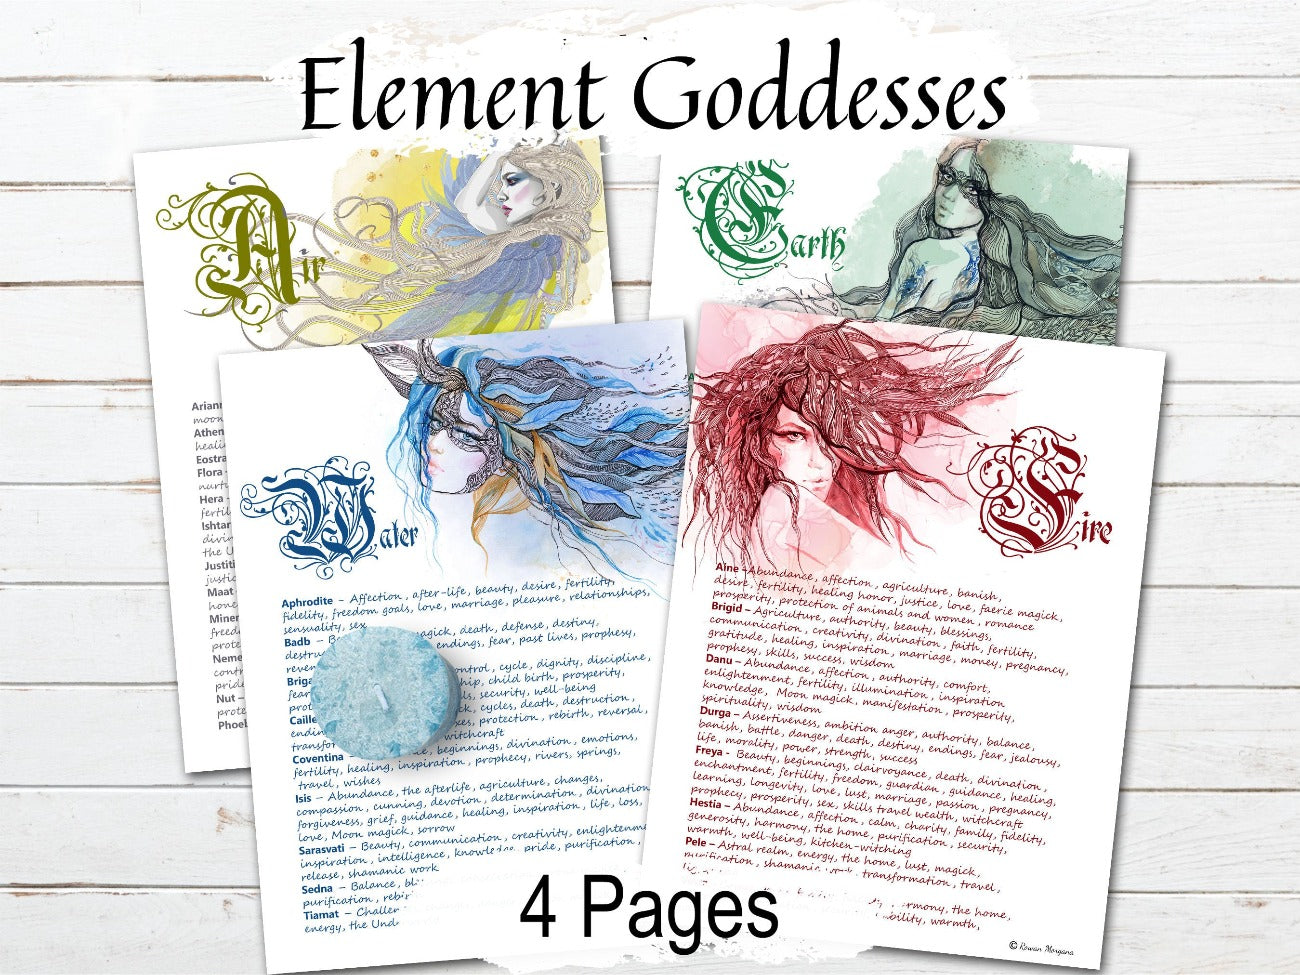 ELEMENT GODDESSES of Earth, Air, Fire & Water, 4 Pages, Goddess Correspondences, Wicca Witchcraft Elemental Goddess Cheat Sheets Printable - Morgana Magick Spell